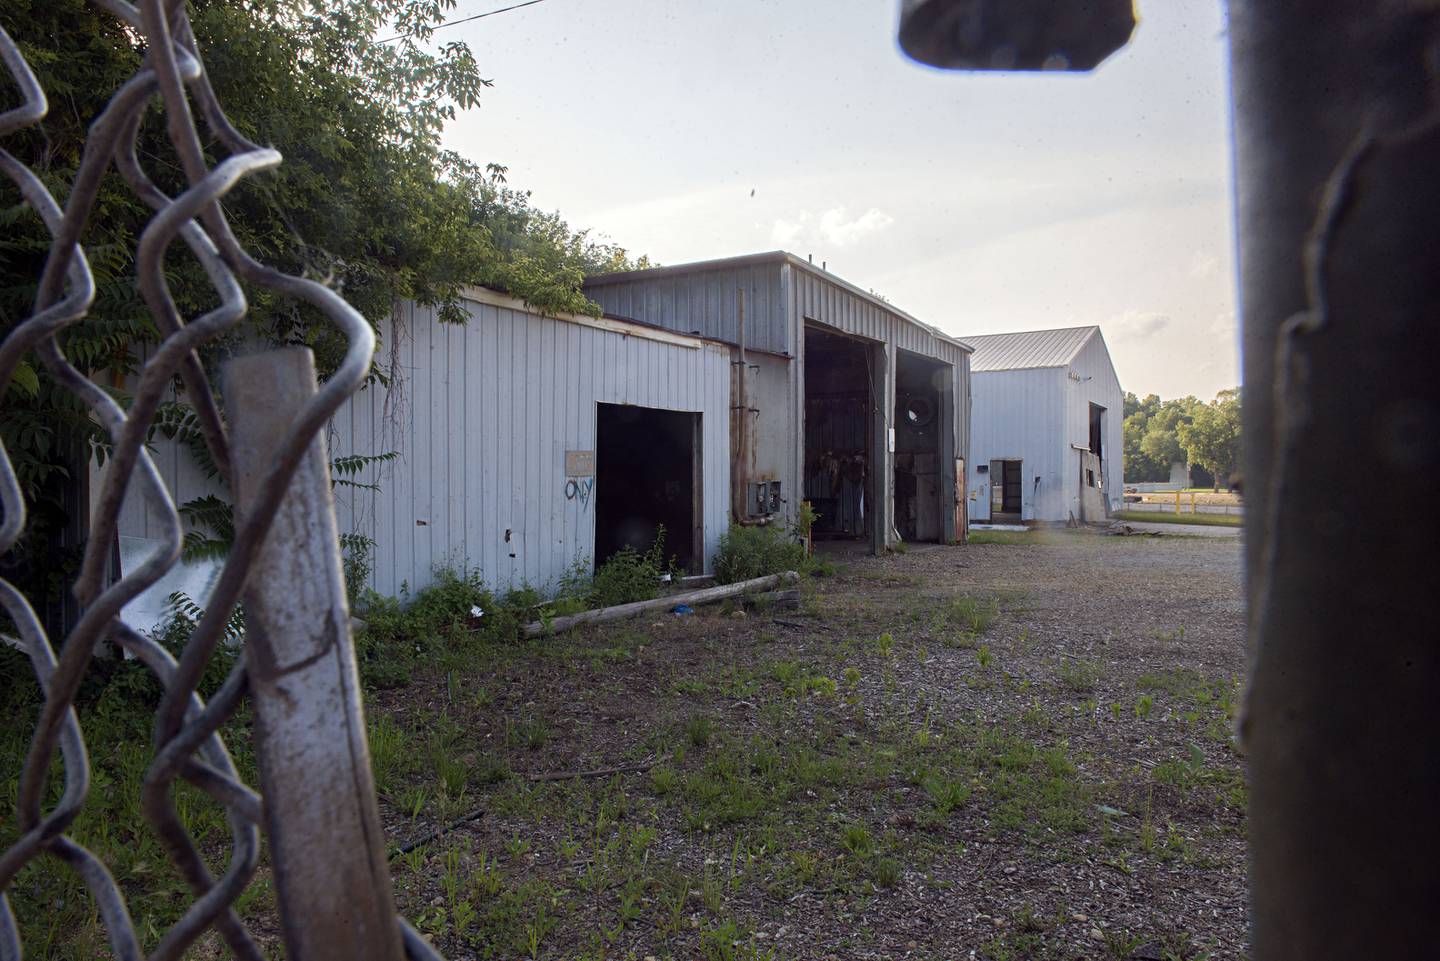 Local officials hope to raze the remaining buildings on the former DIxon Iron and Metal yard along the Rock River in Dixon.